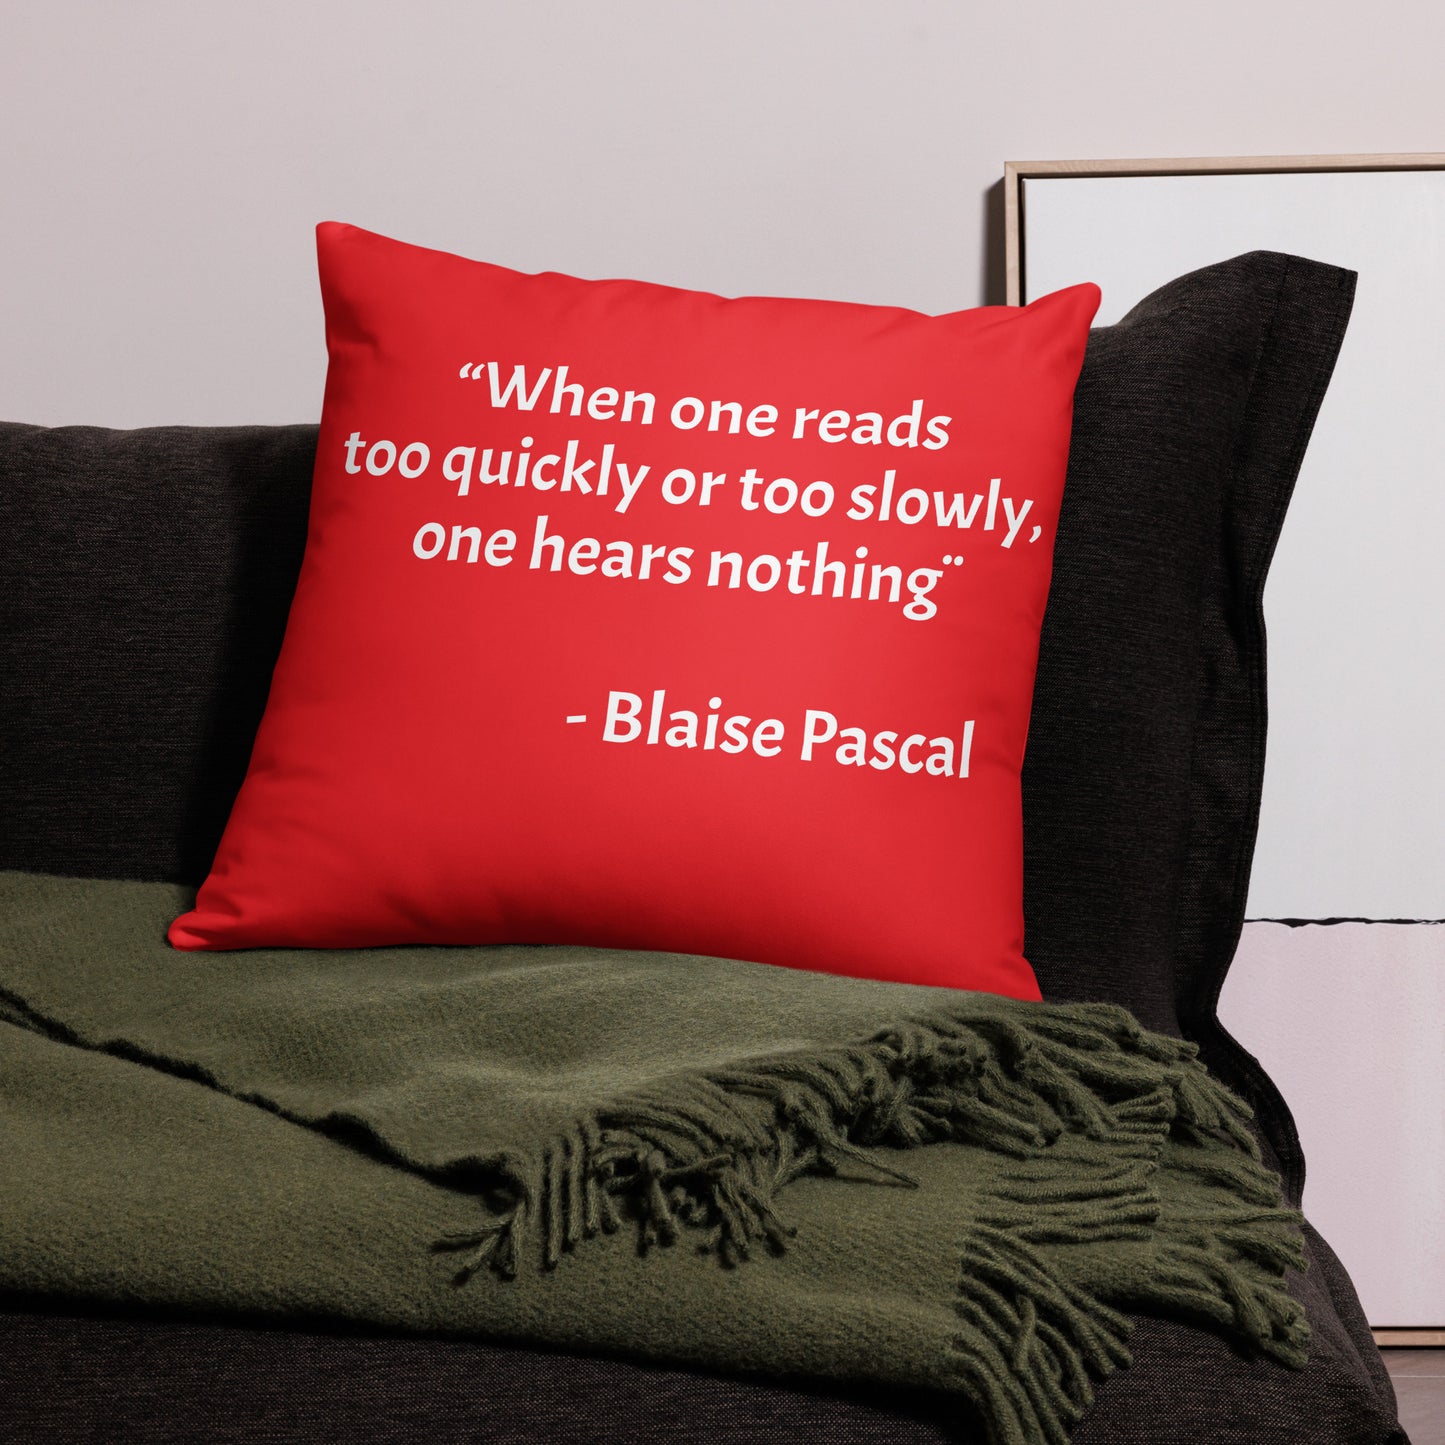 “When one reads too quickly or too slowly, one hears nothing " Blaise Pascal - Pillow